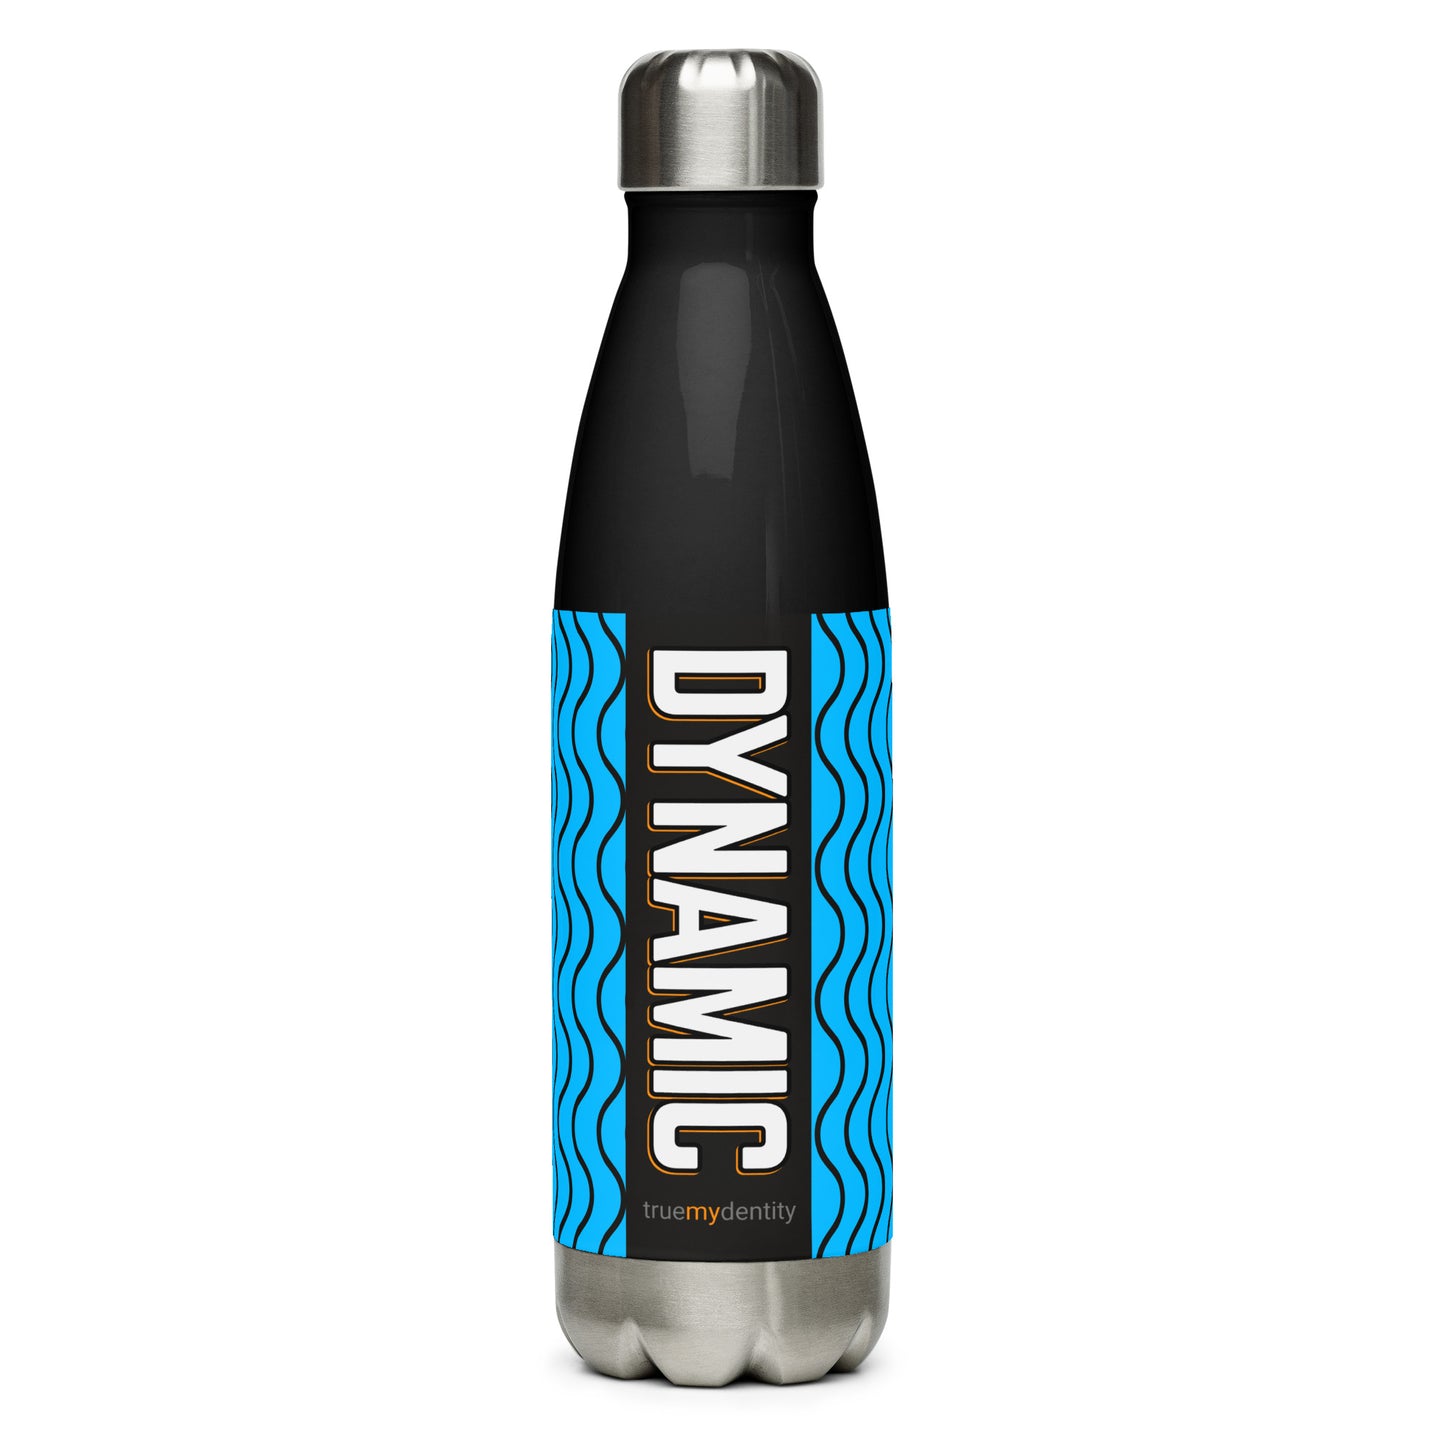 DYNAMIC Stainless Steel Water Bottle Blue Wave Design, 17 oz, in Black or White